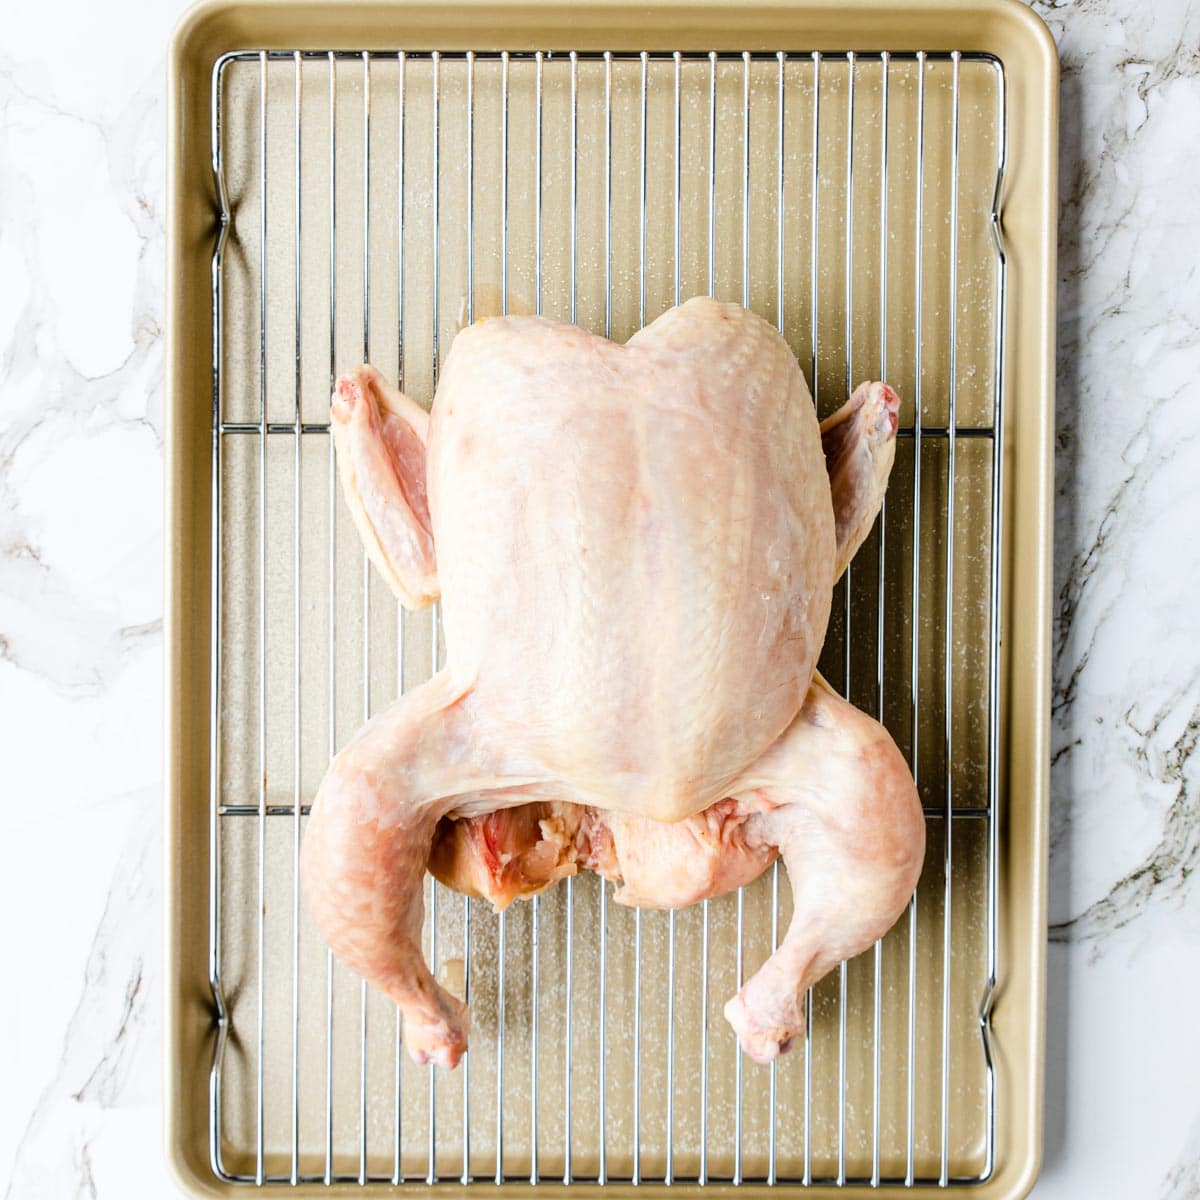 Chicken on a wire rack on a rimmed sheet pan